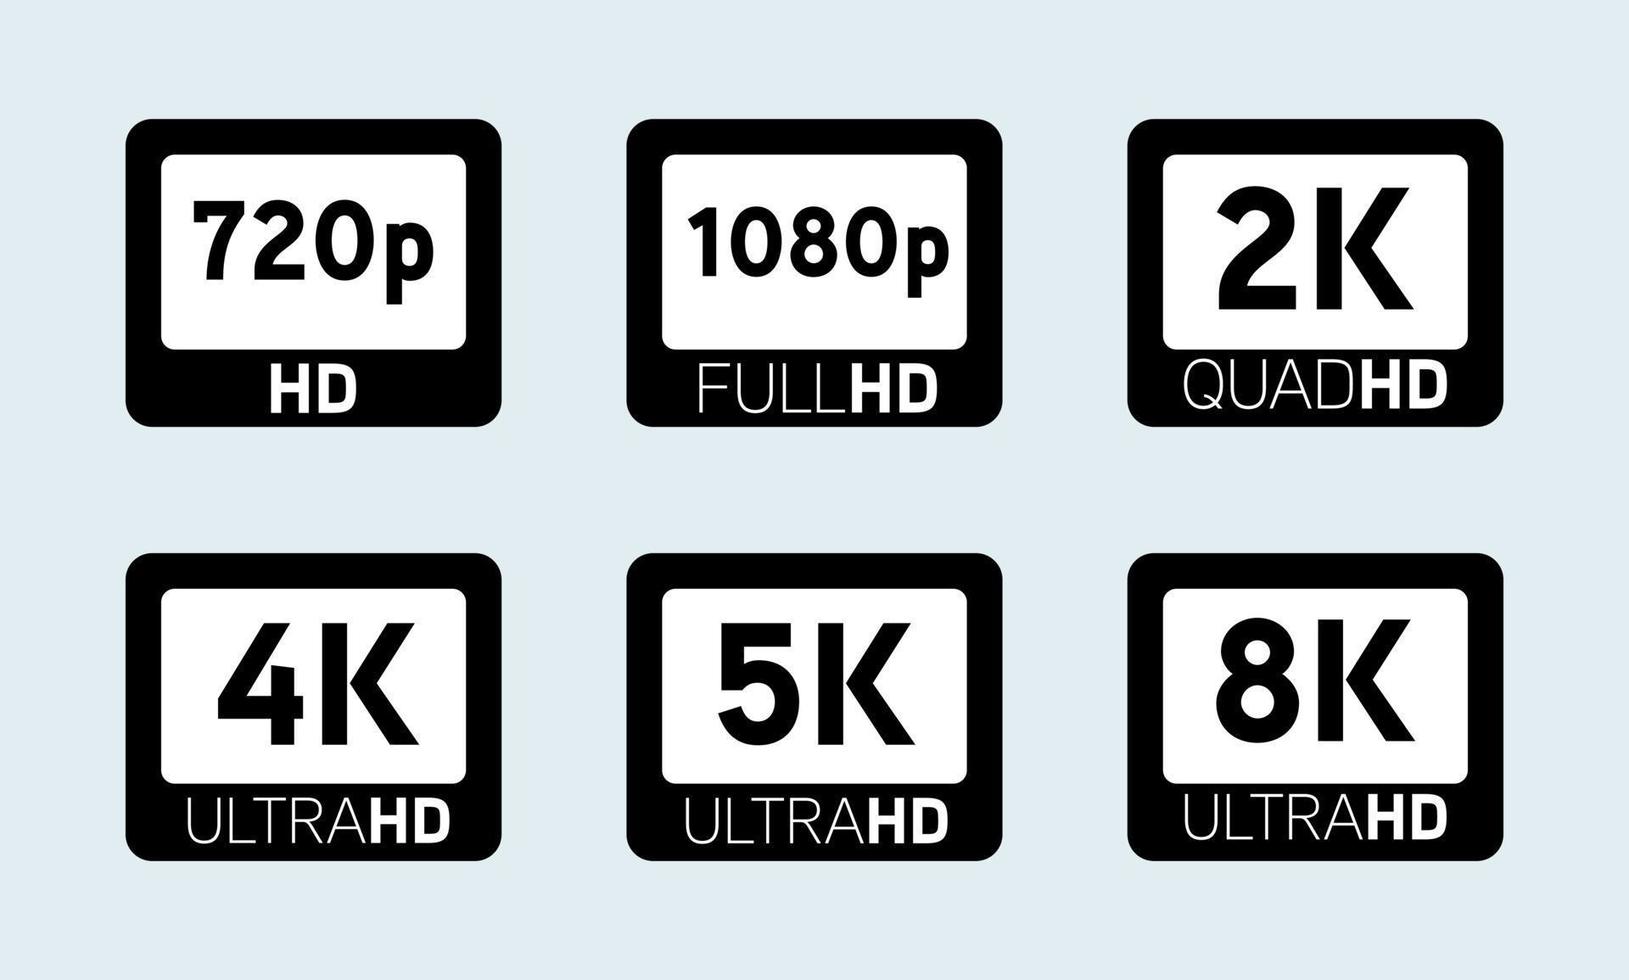 Set screen tv with 4k ultra hd video technology icon. Set of video quality or resolution icons HD, Full HD, QHD, UHD, 2K, 4K, 5K, 8K. vector